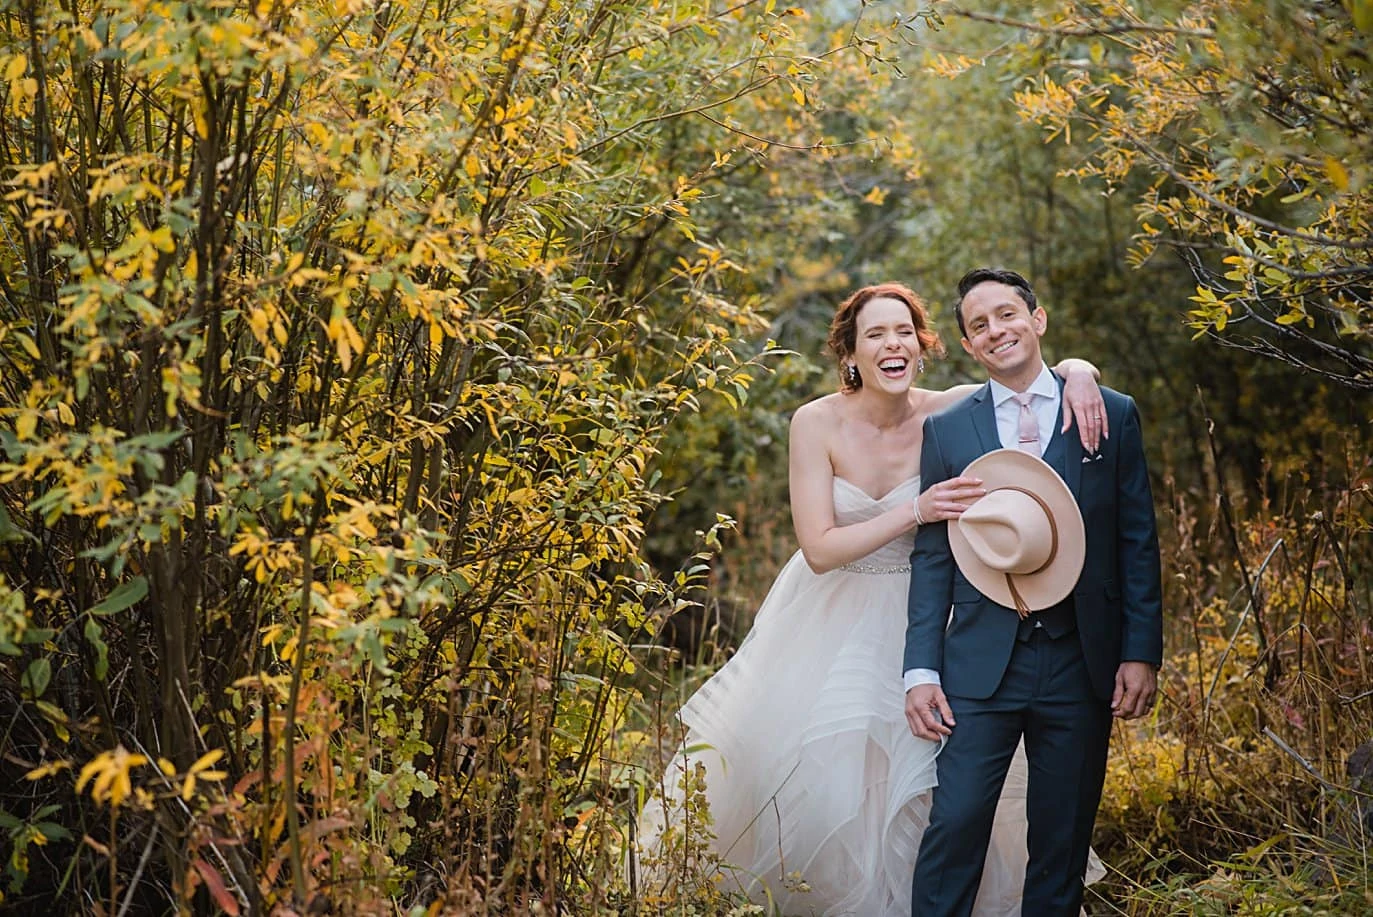 bride with pink hat in fall foliage in Aspen by Denver wedding photographer Jennie Crate